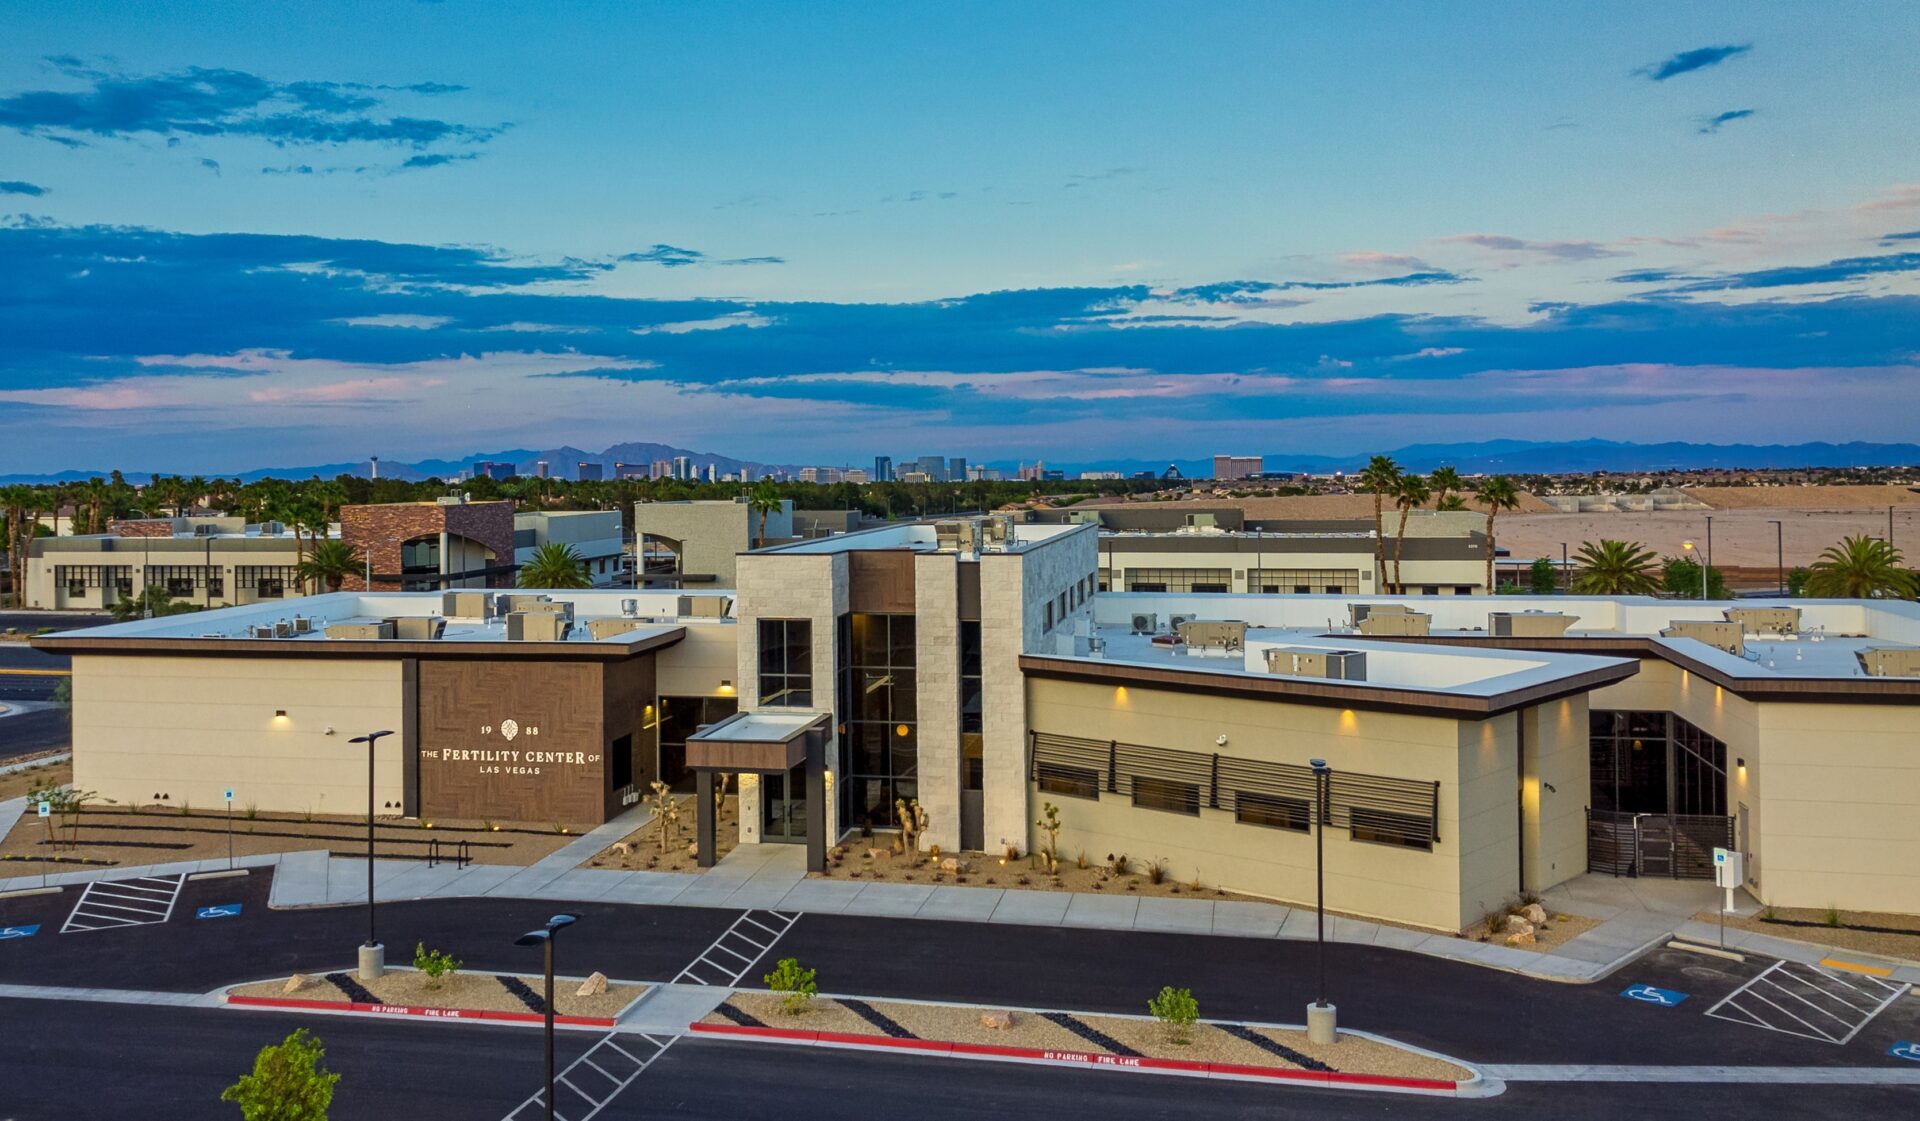 This new facility boasts more than twice the space as the former location and is conveniently located in Southern Las Vegas at 536